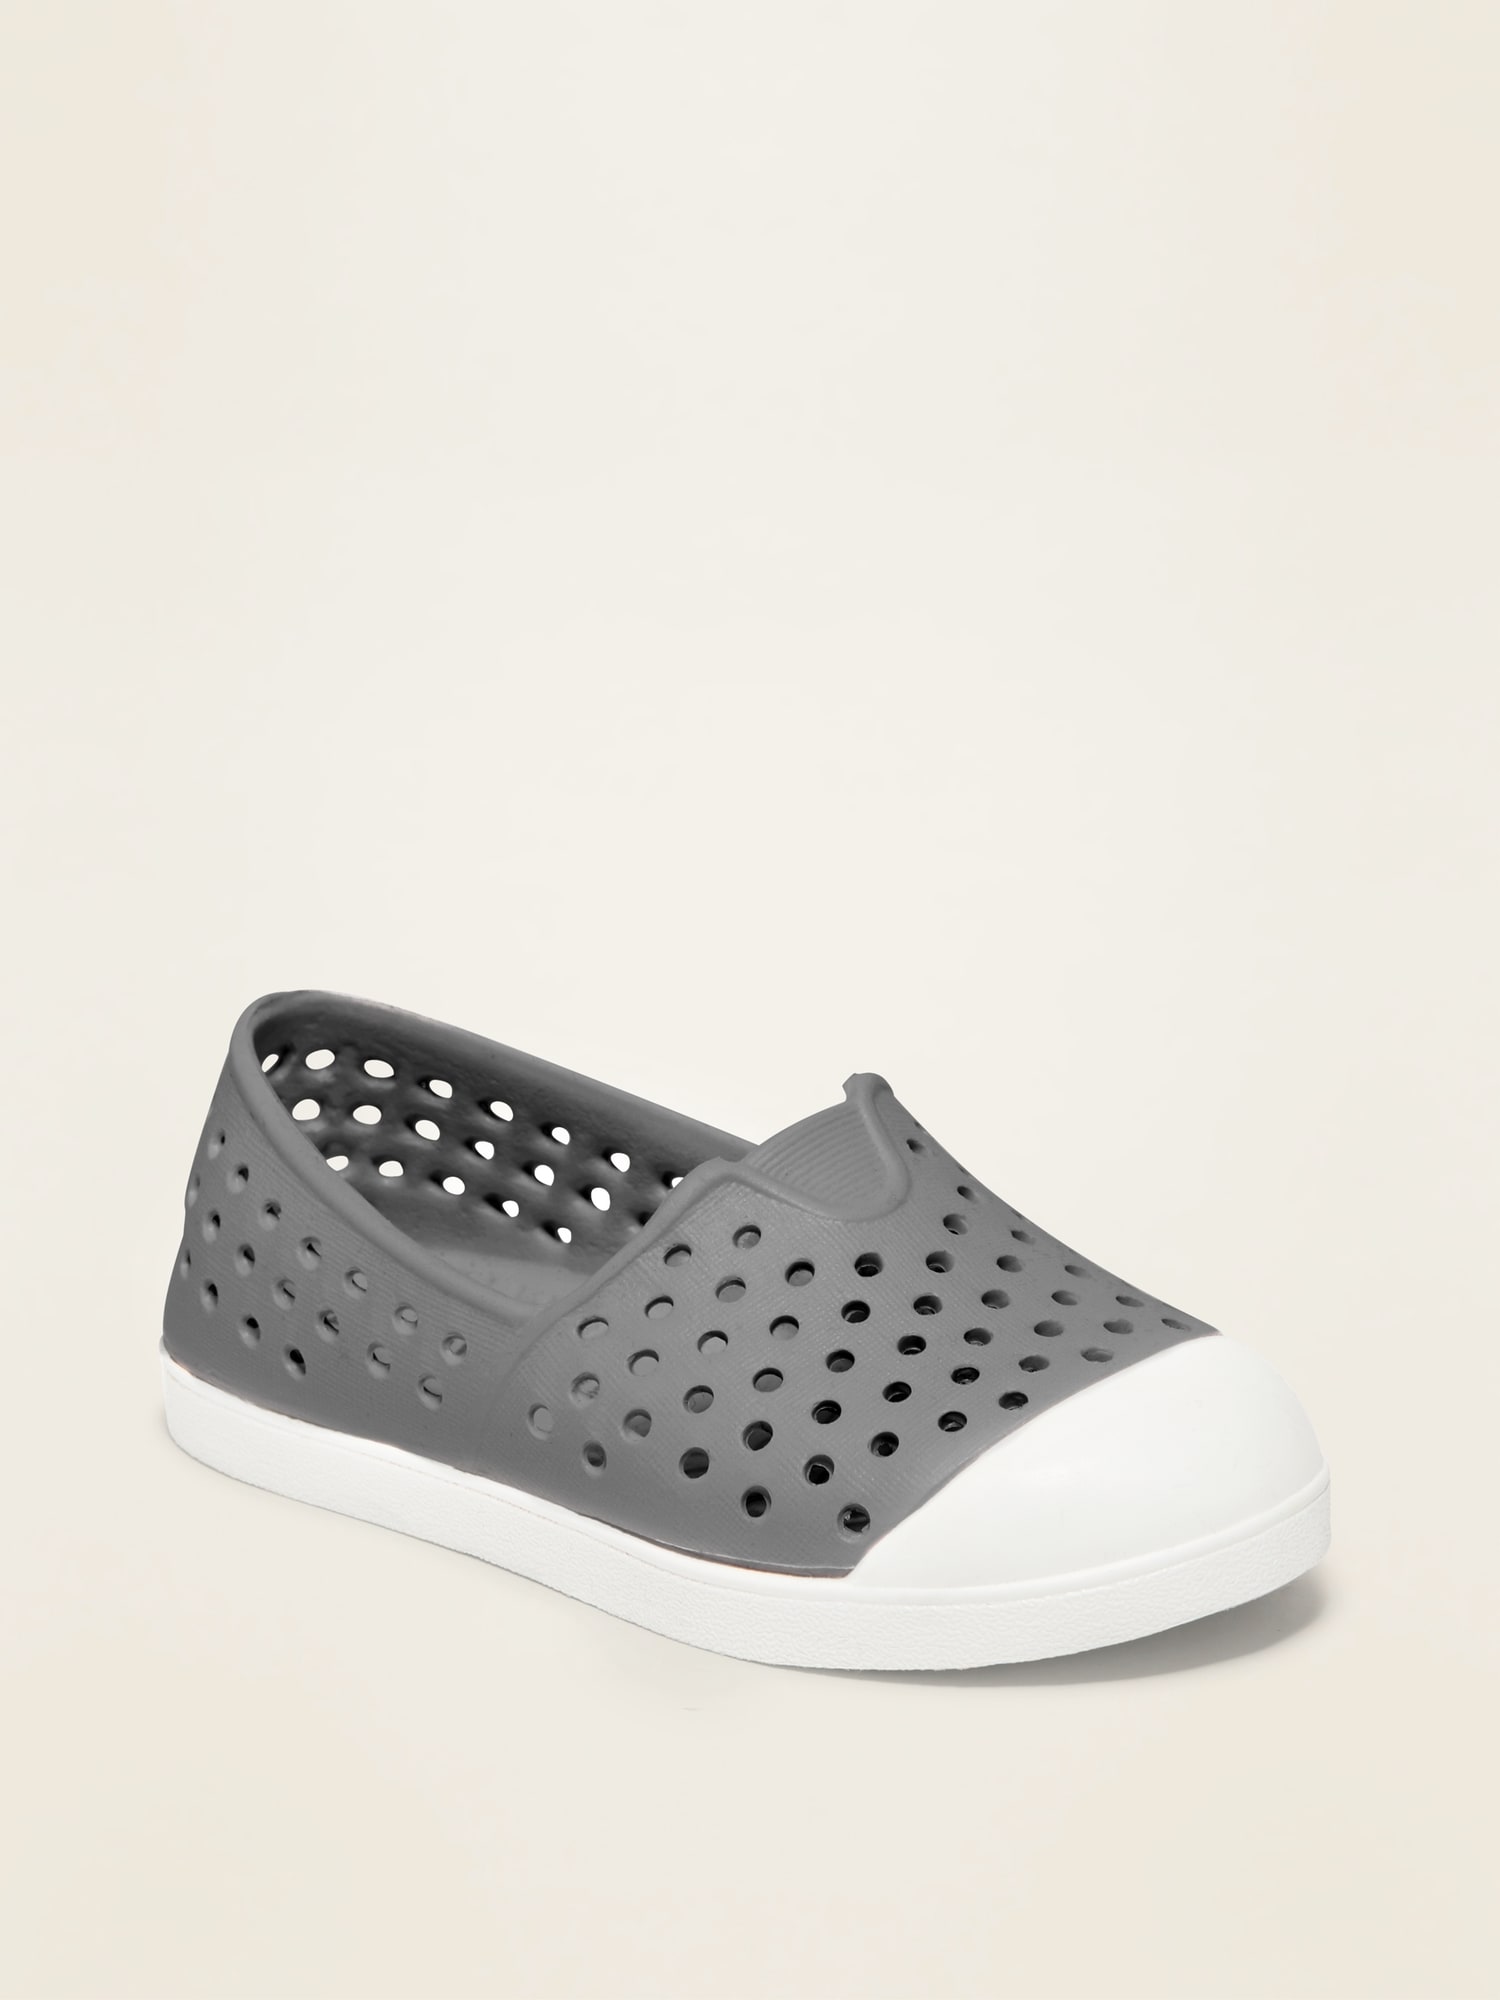 Perforated Slip-On Unisex Sneakers for 